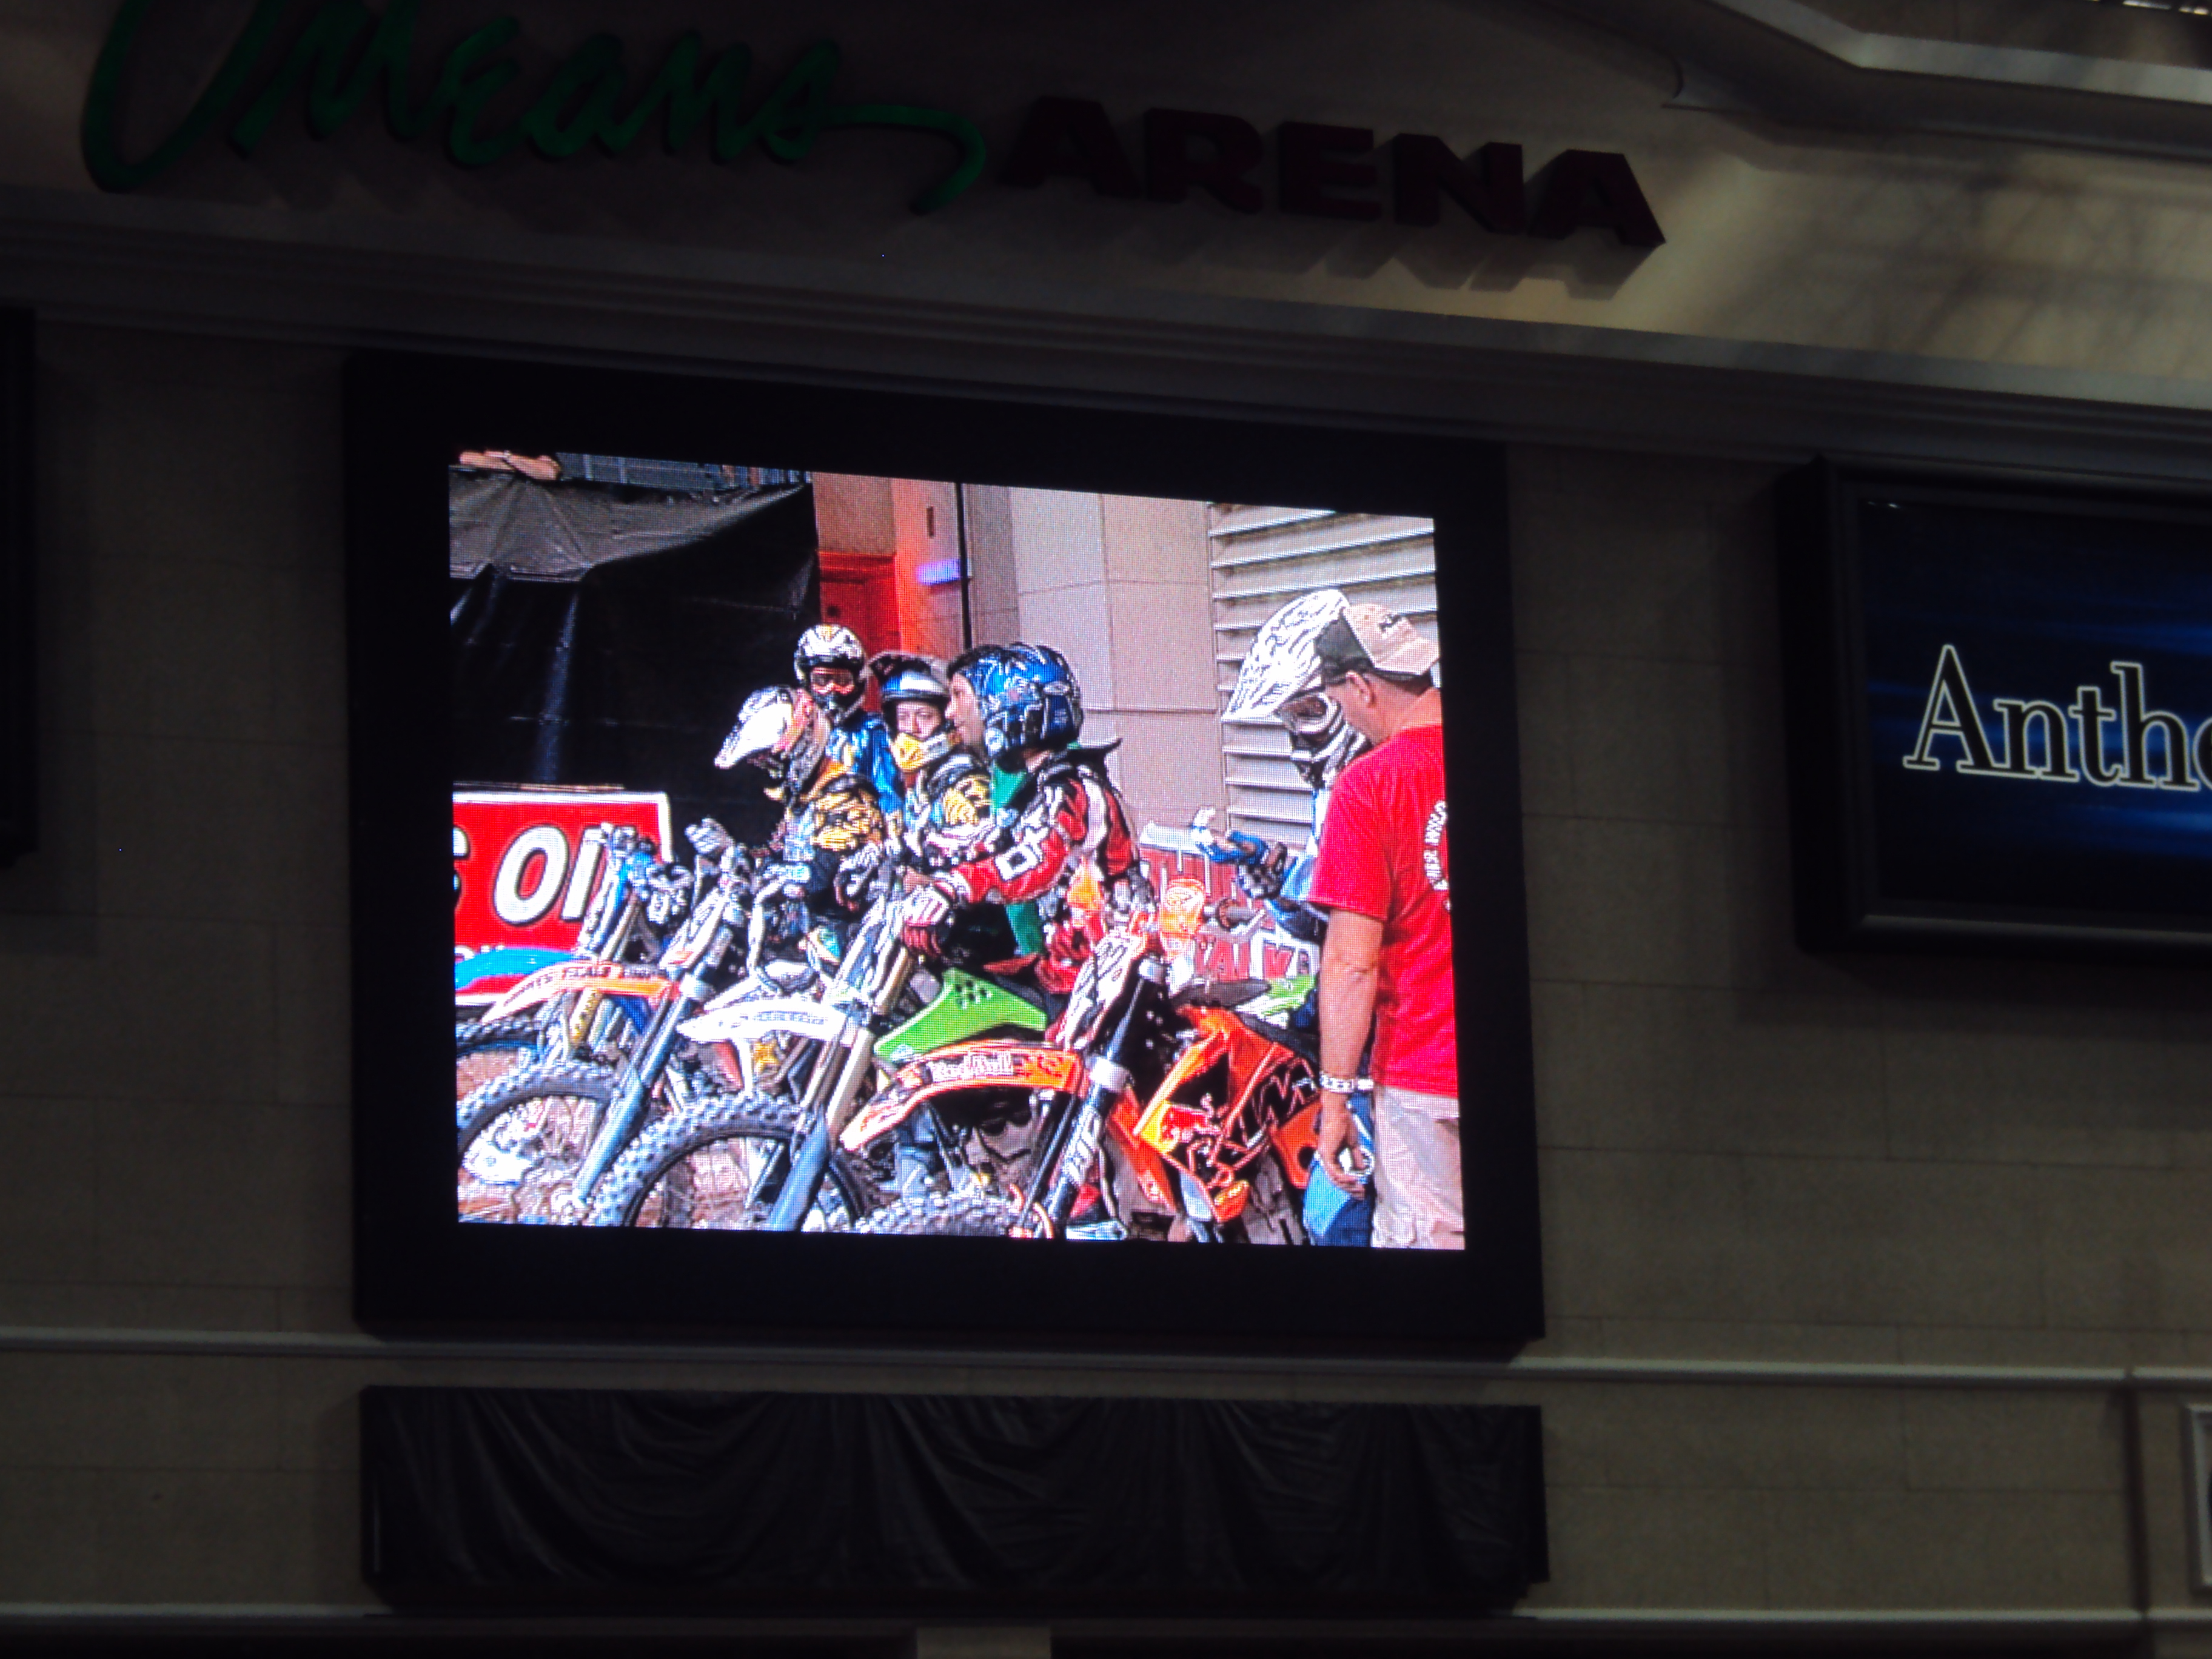 The Dash starting line from the big screen